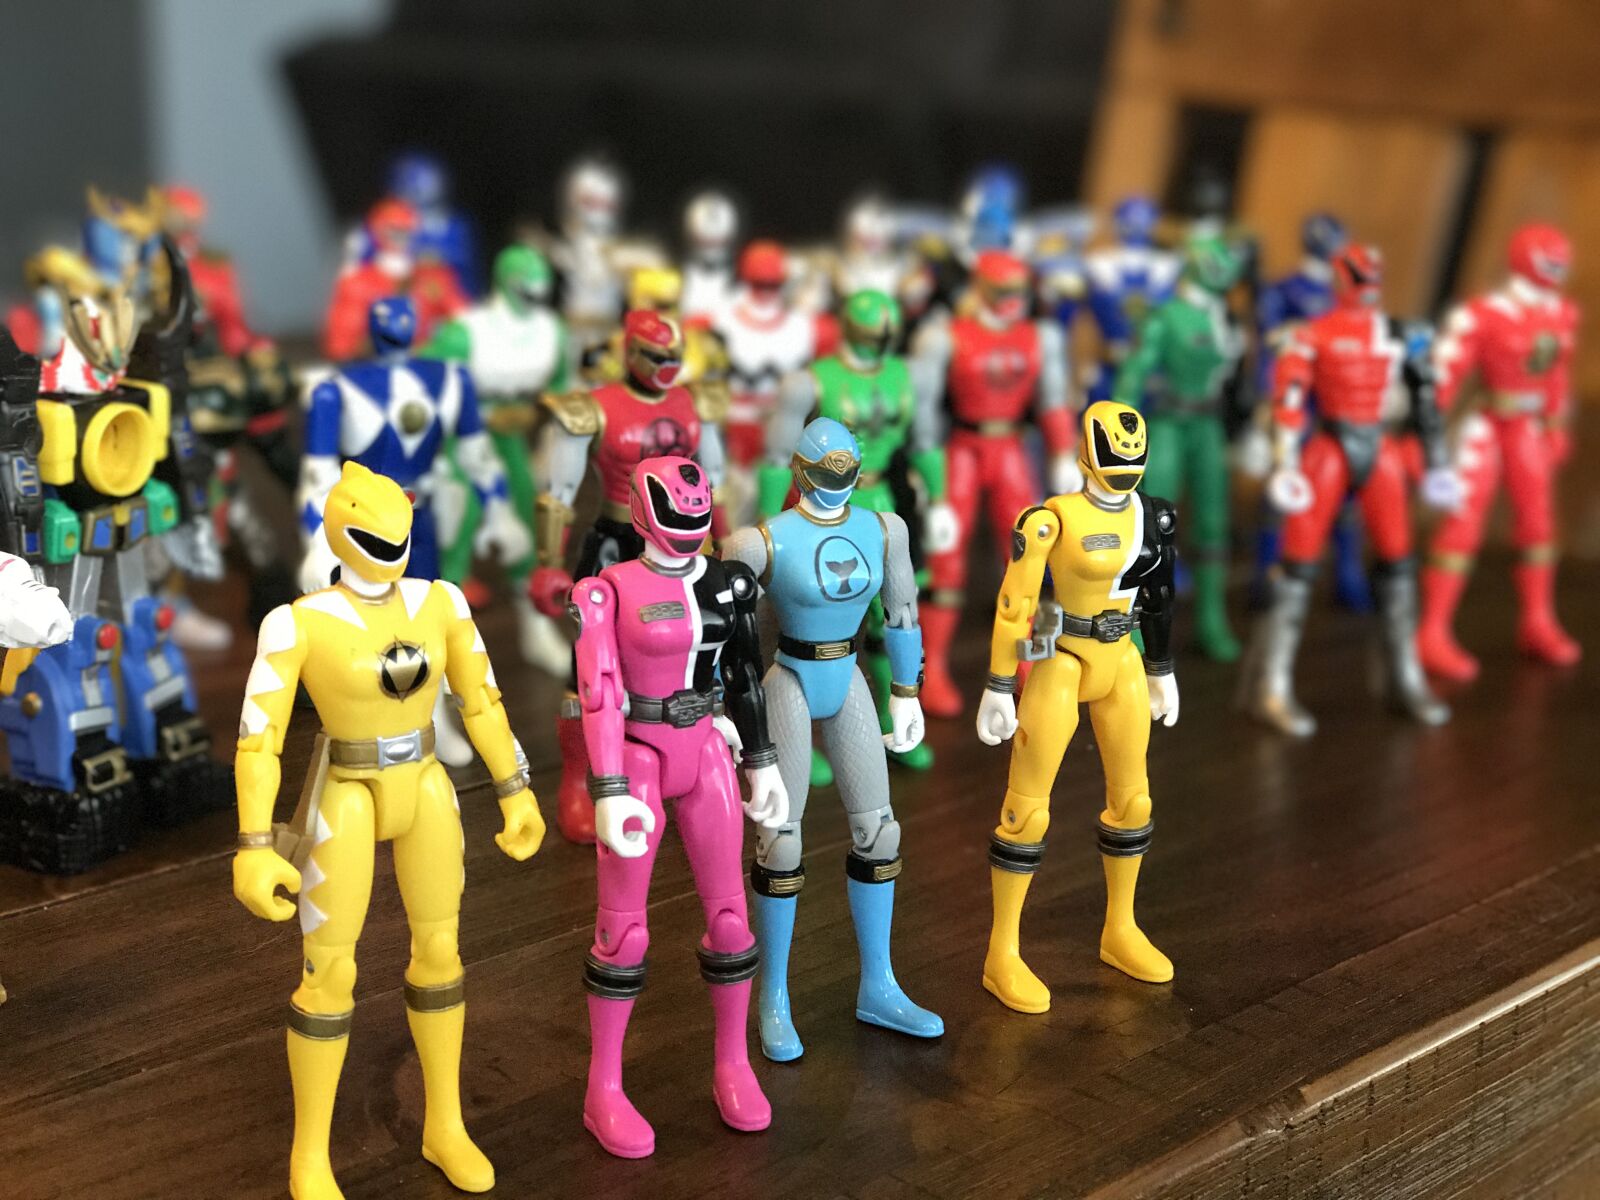 iPhone 7 Plus back iSight Duo camera 6.6mm f/2.8 sample photo. Power, rangers, toys photography